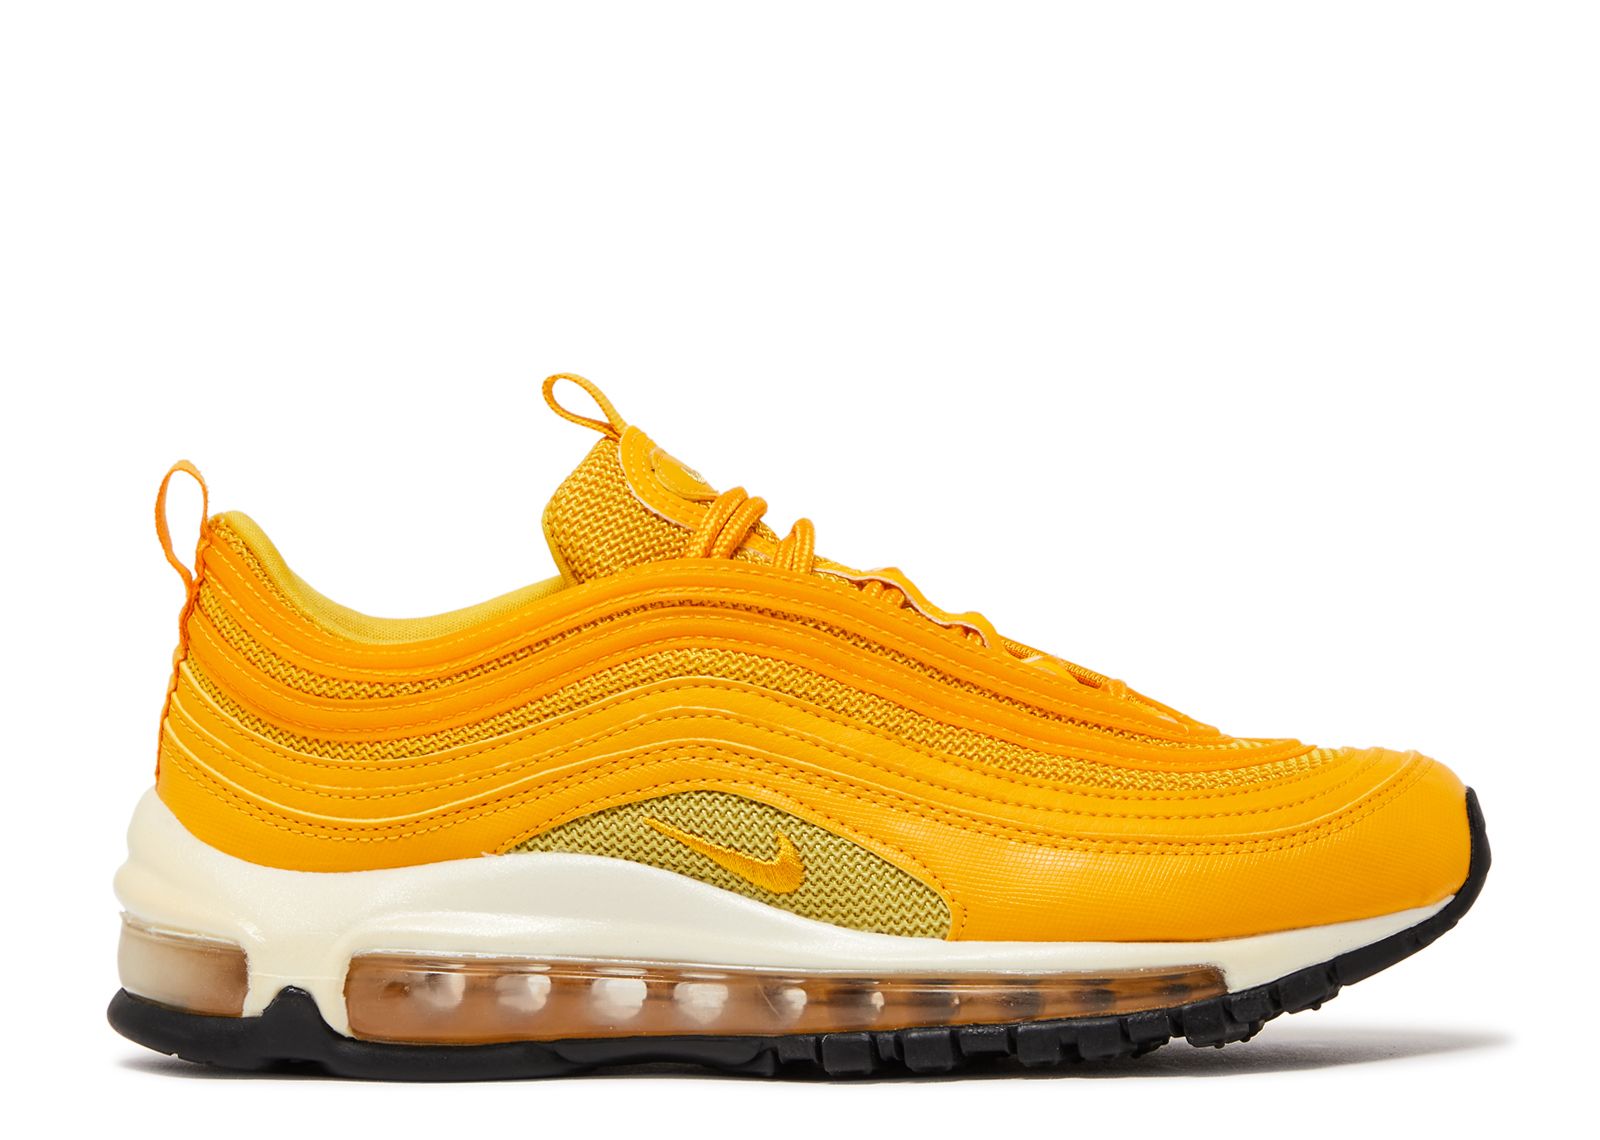 yellow and white air max 97 womens